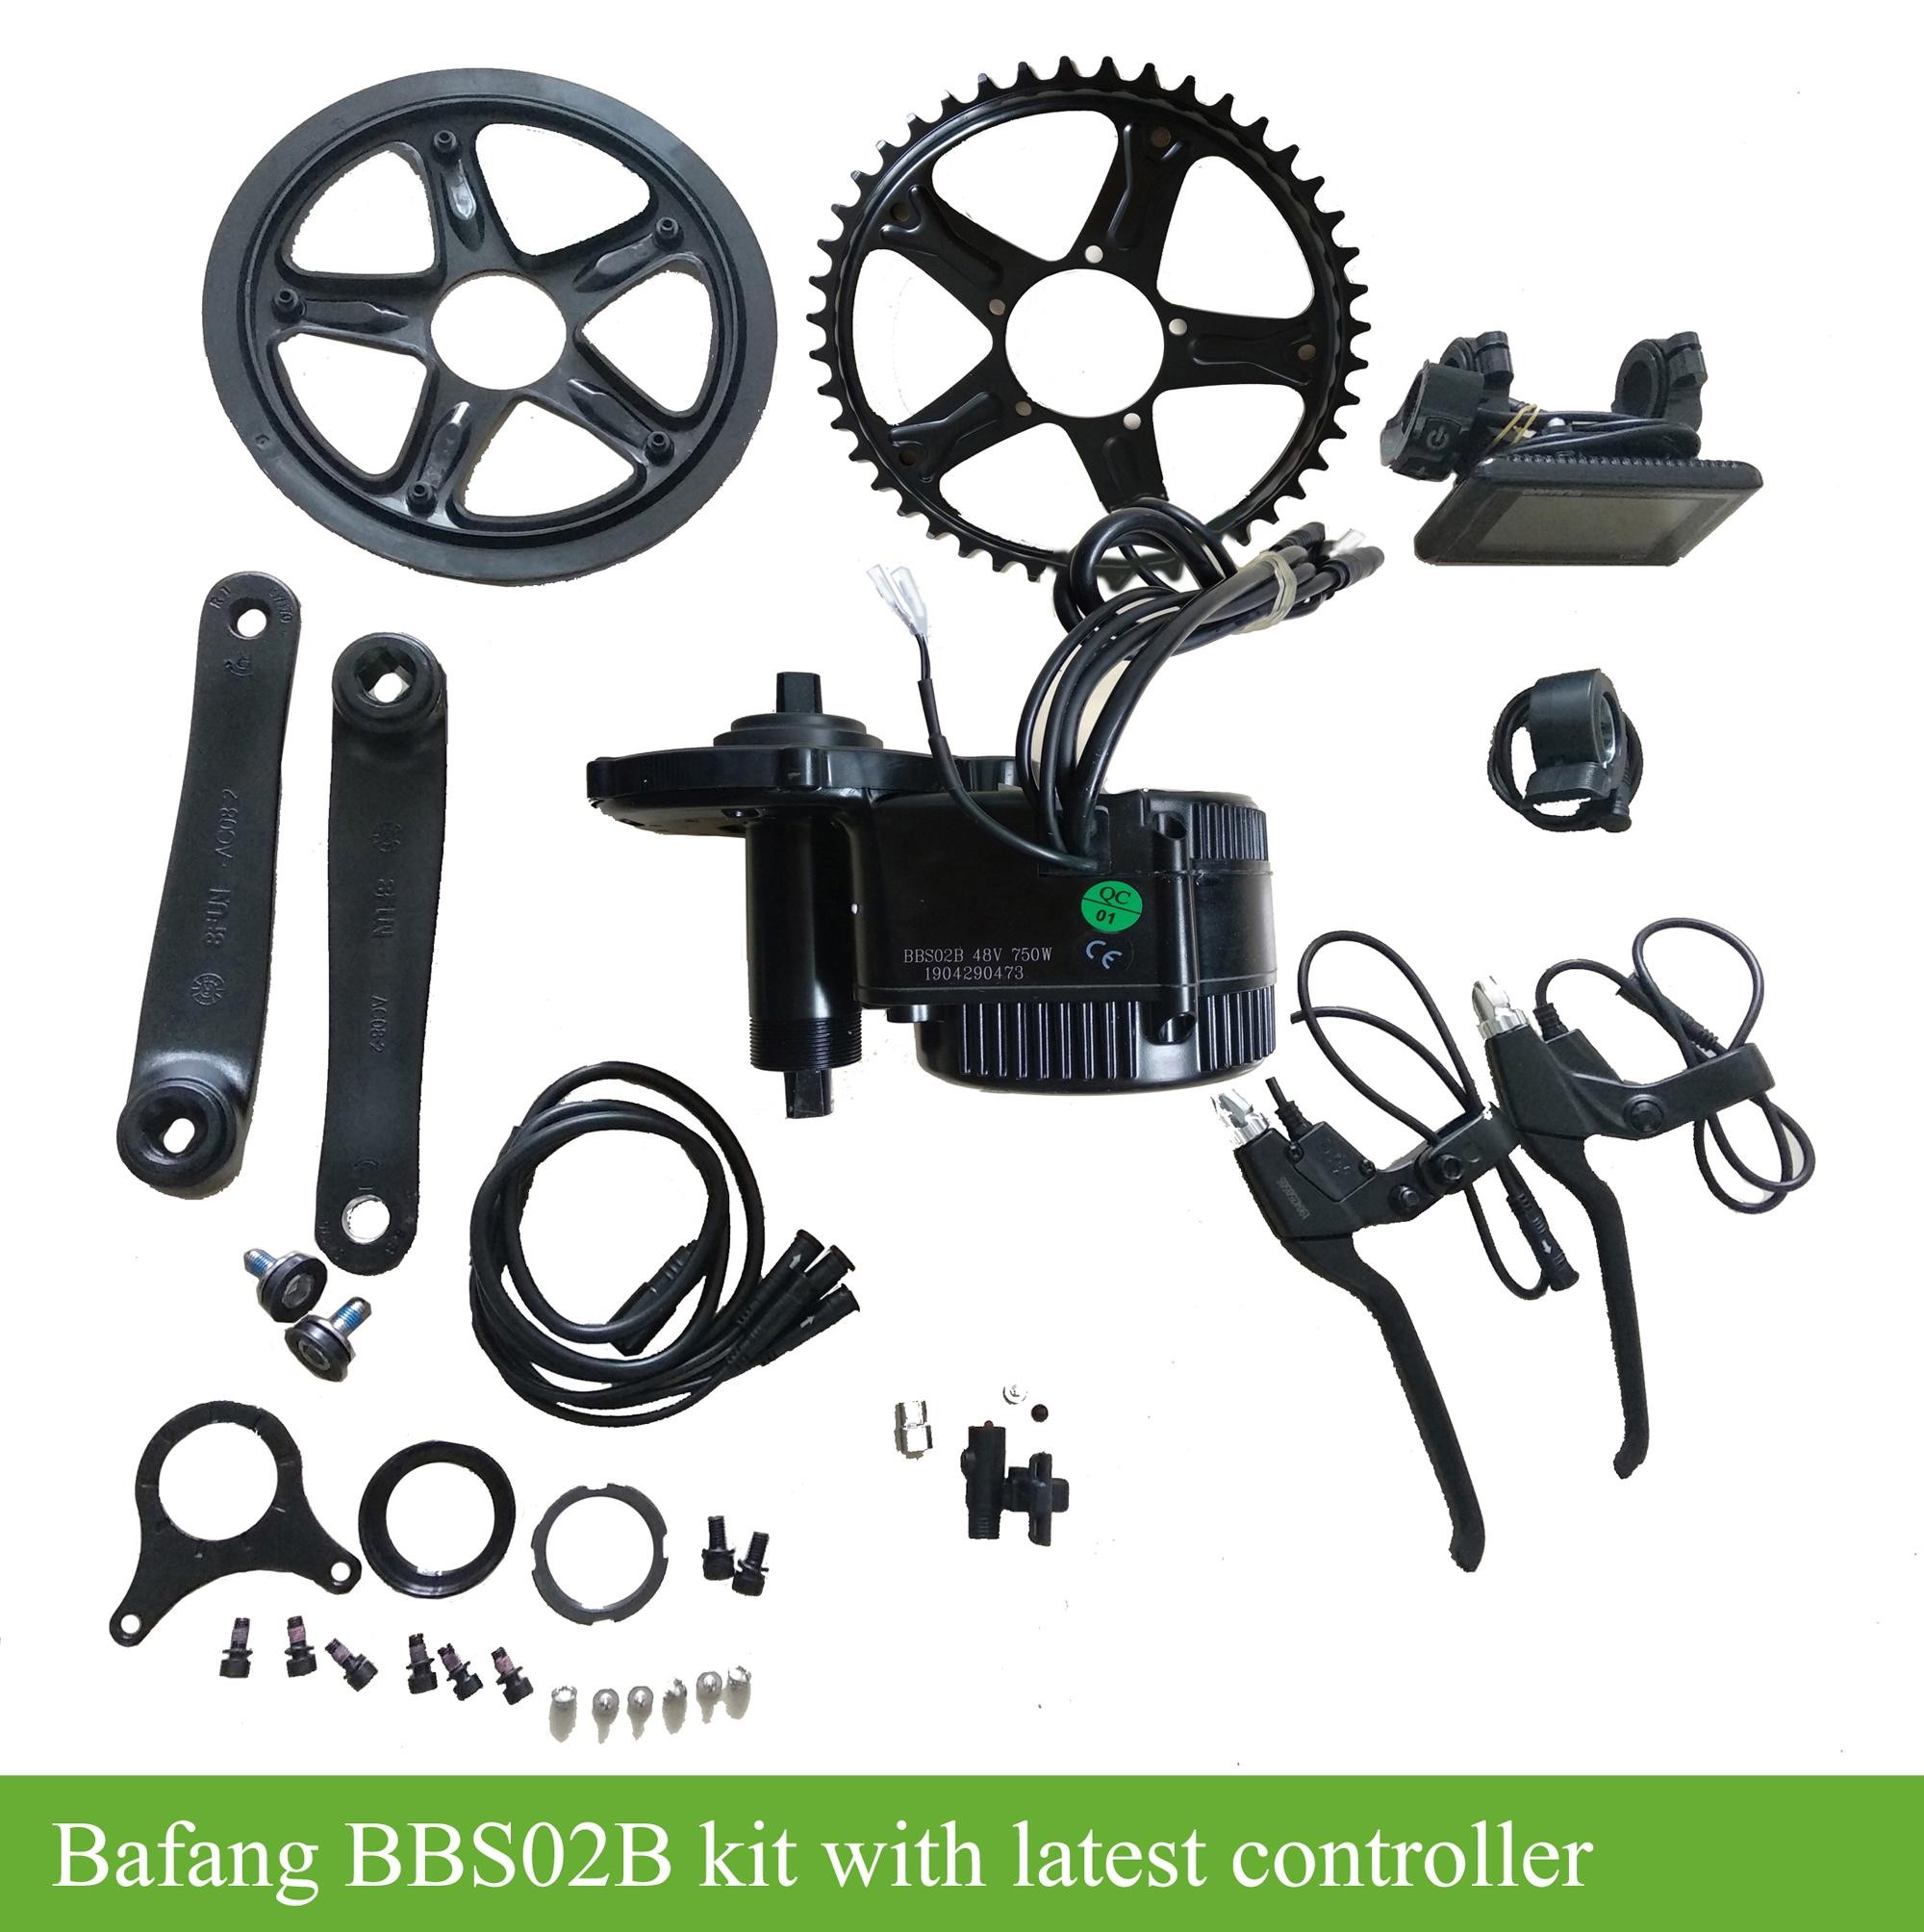 Controller for 48v 500w BBS02-B Bafang Mid drive conversion kit ebike 